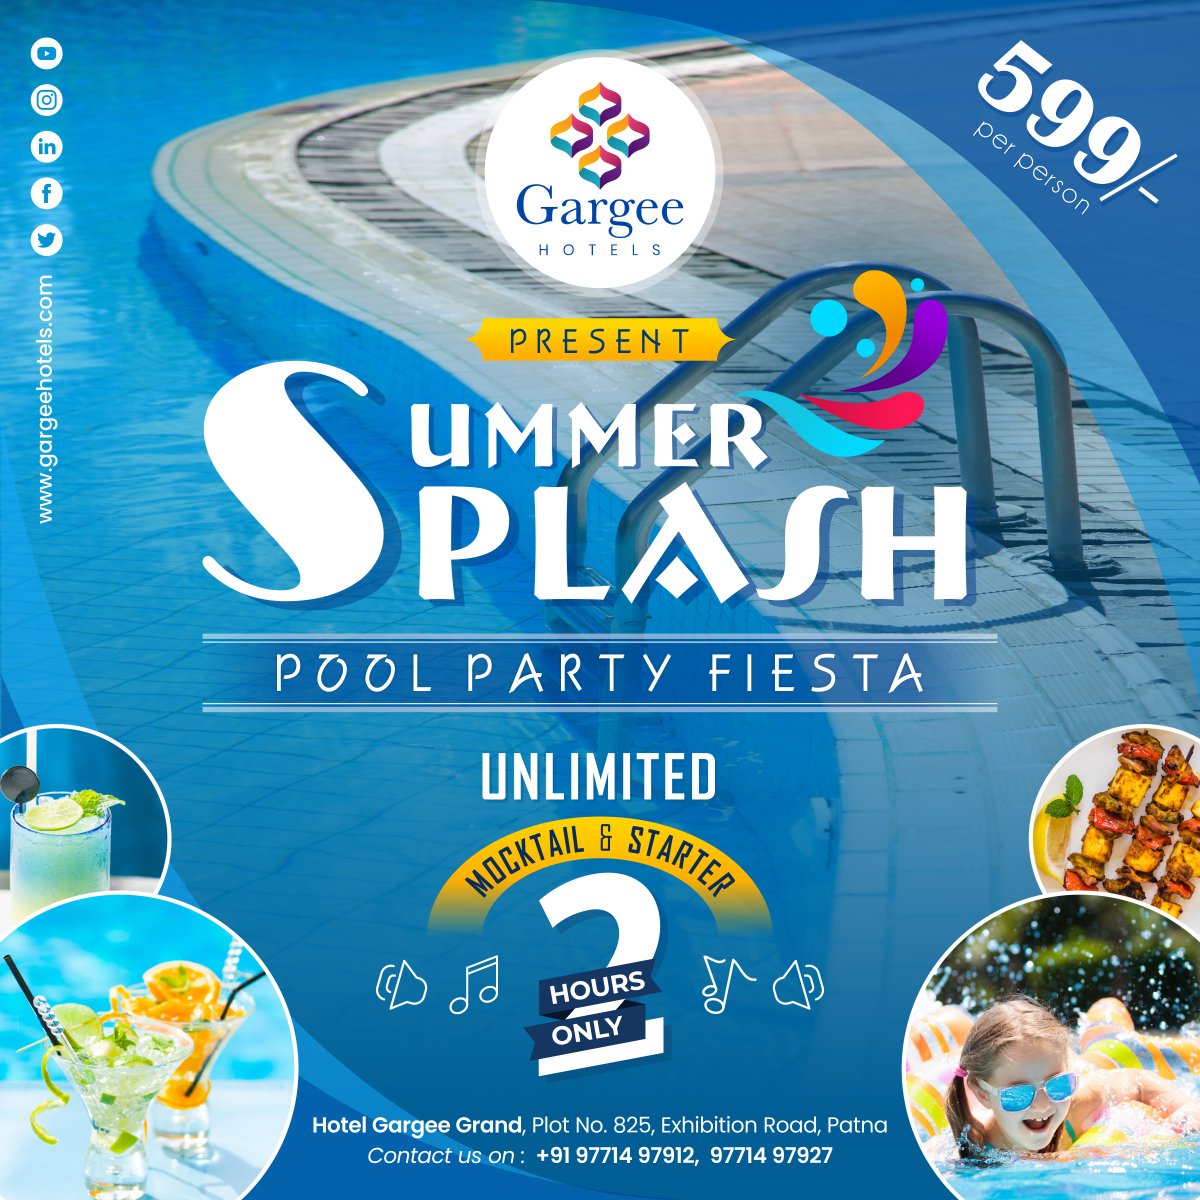 Have a great time this summer, enjoy with your friends and family with us...

Hotel Gargee Grand
Plot No. 825, Exhibition Road, Patna

Contact : +91 97714 97912, 97714 97927

#swimmingpool #poolparty #summersplash #fiesta #unlimitedfood #mocktail #starter #enjoy #party #music